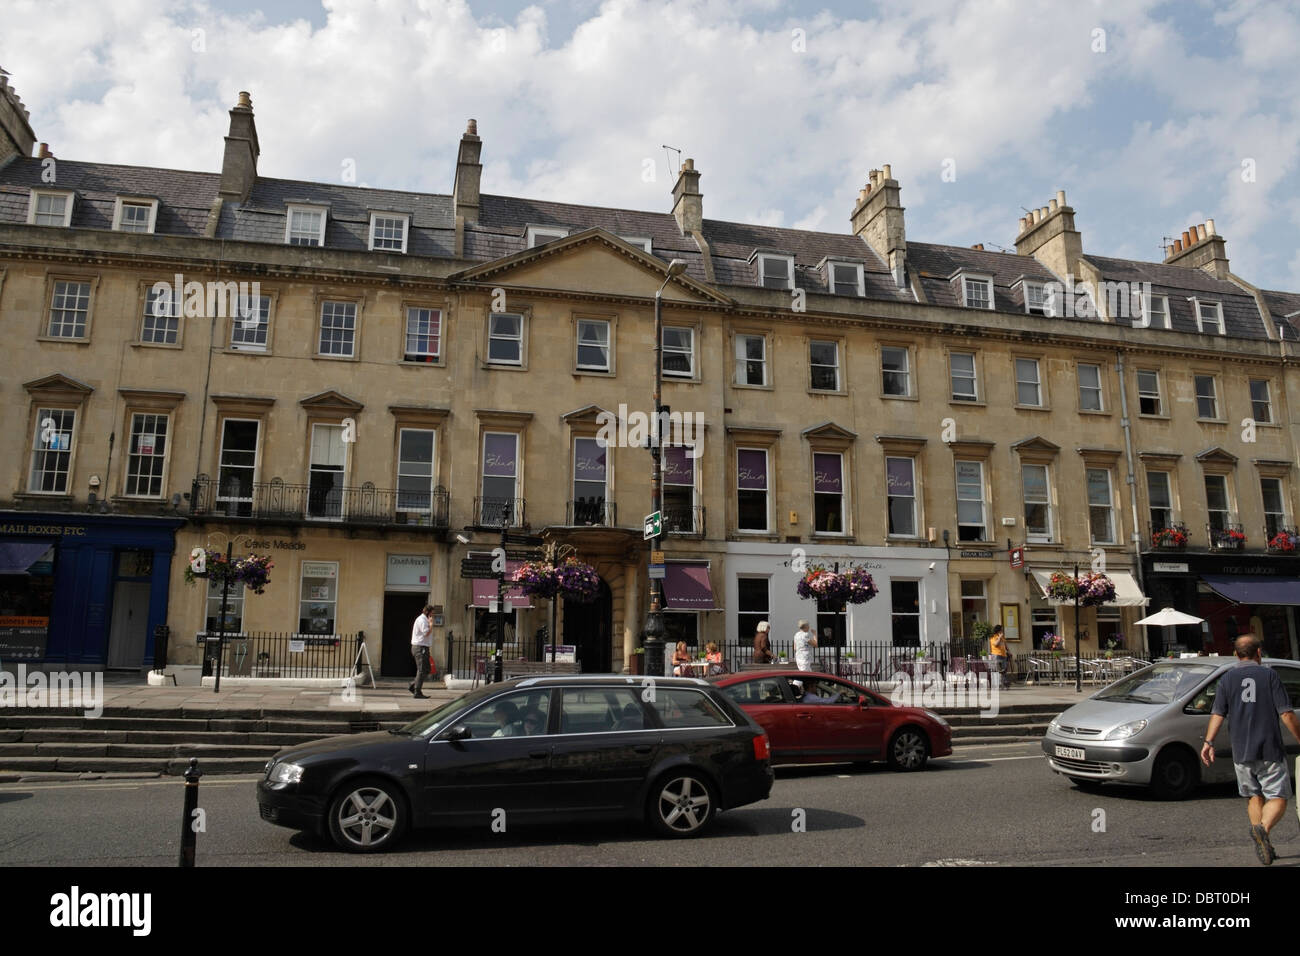 Row of Georgian Buildings Bath city centre England. English townhouses George Street Grade II  listed building part of the conservation area Stock Photo